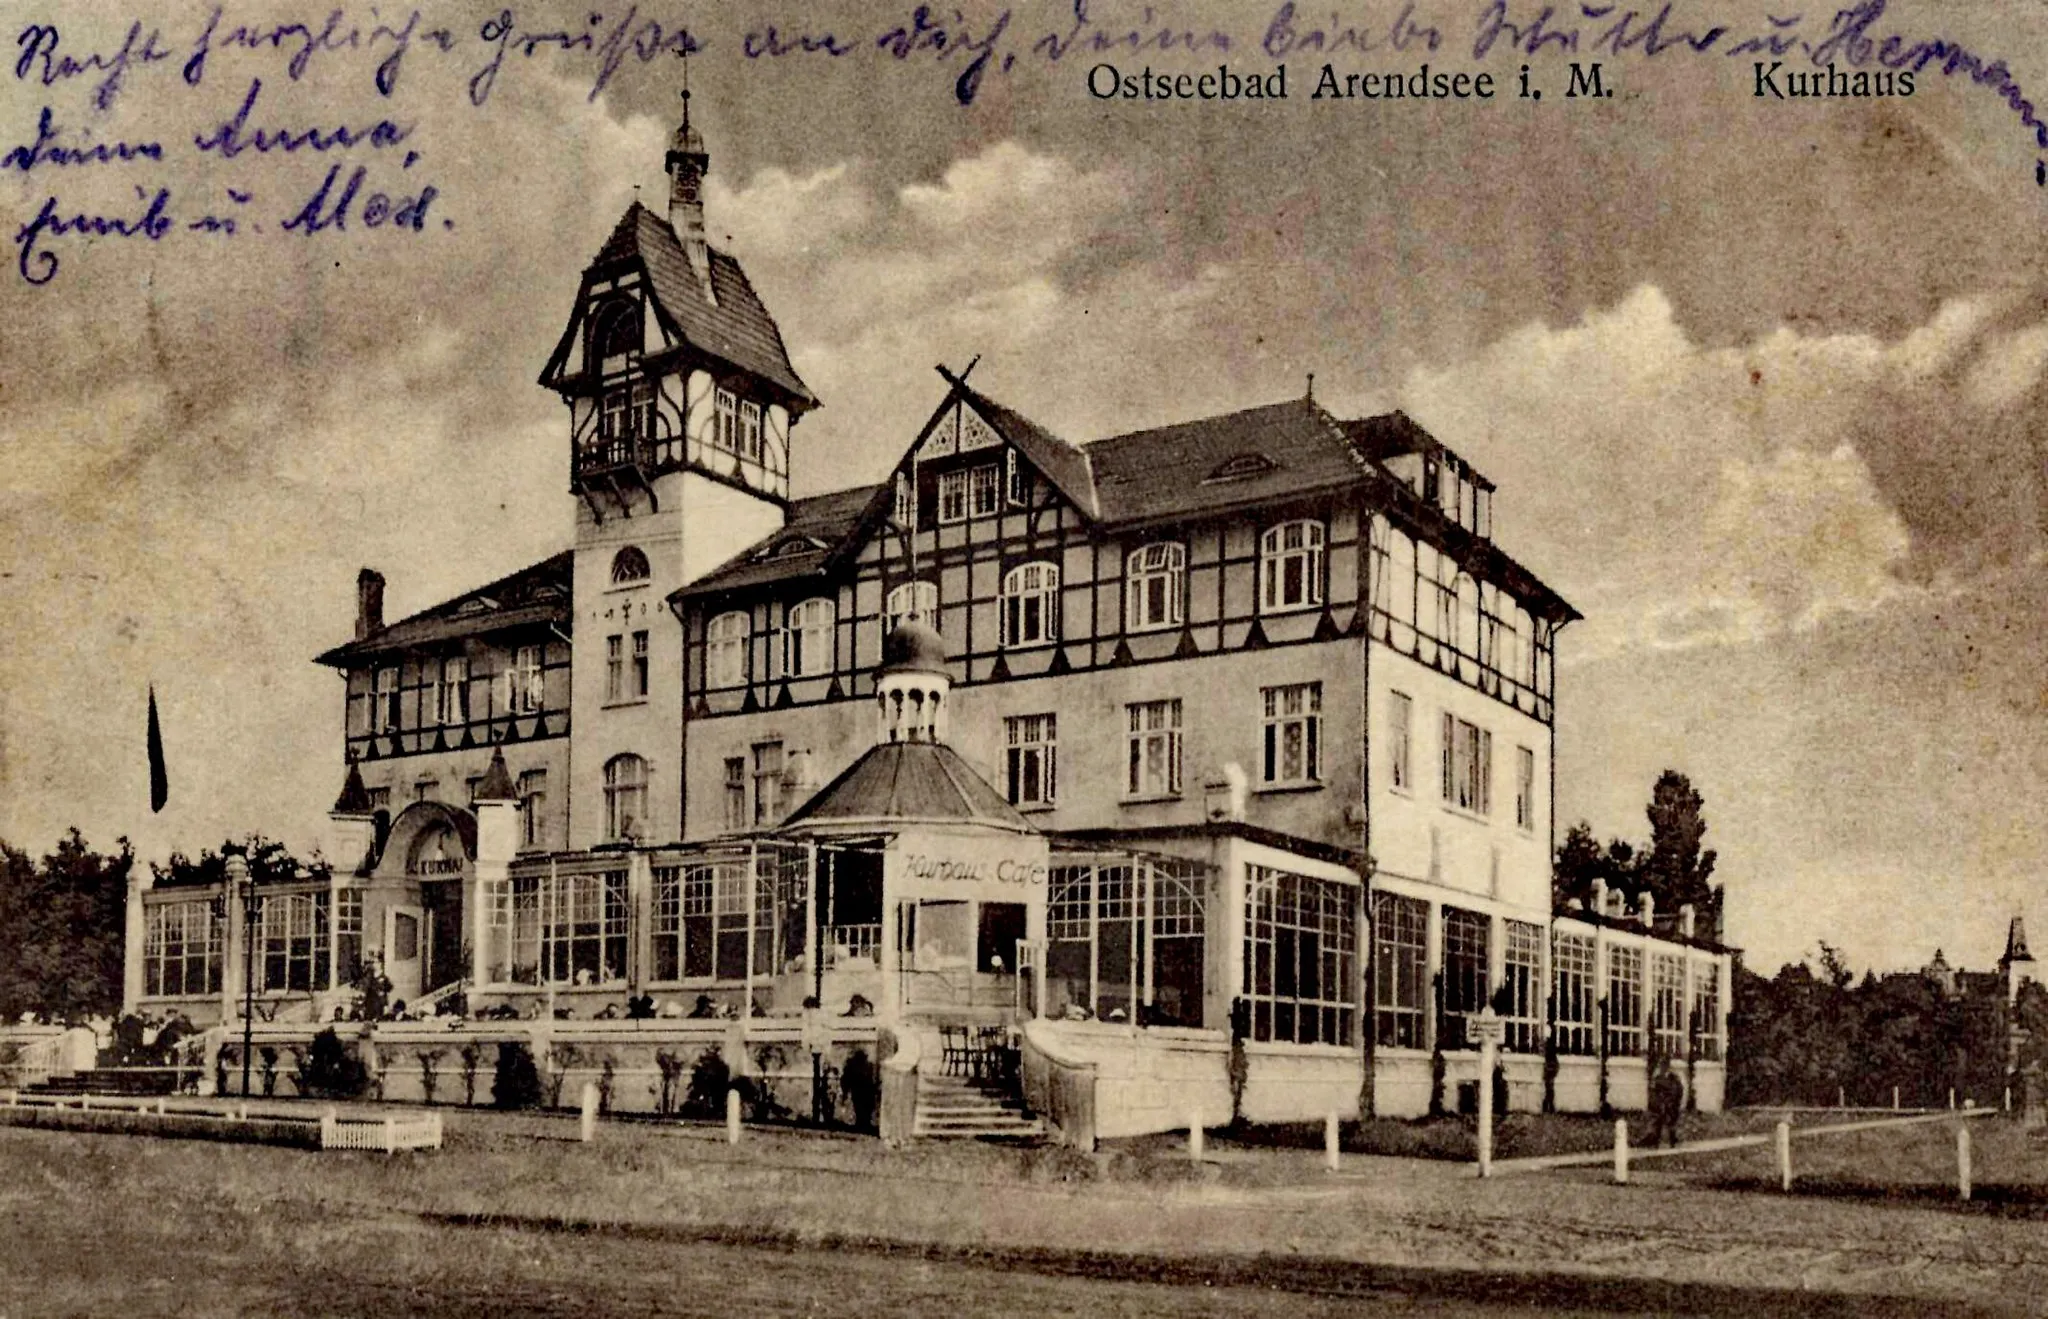 Photo showing: One of the old spa hotels in the seaside resort of Kühlungsborn. It was built in 1905 and the main landmark of the town. In 1994, the commune decided to demolish the old building - officially because of the "bad structural condition". This move gone along with fierce protests by the inhabitants.
Today, there is a reminiscent new built hotel complex, that strongly follows the seaside-resort architecture of its historical forerunner.